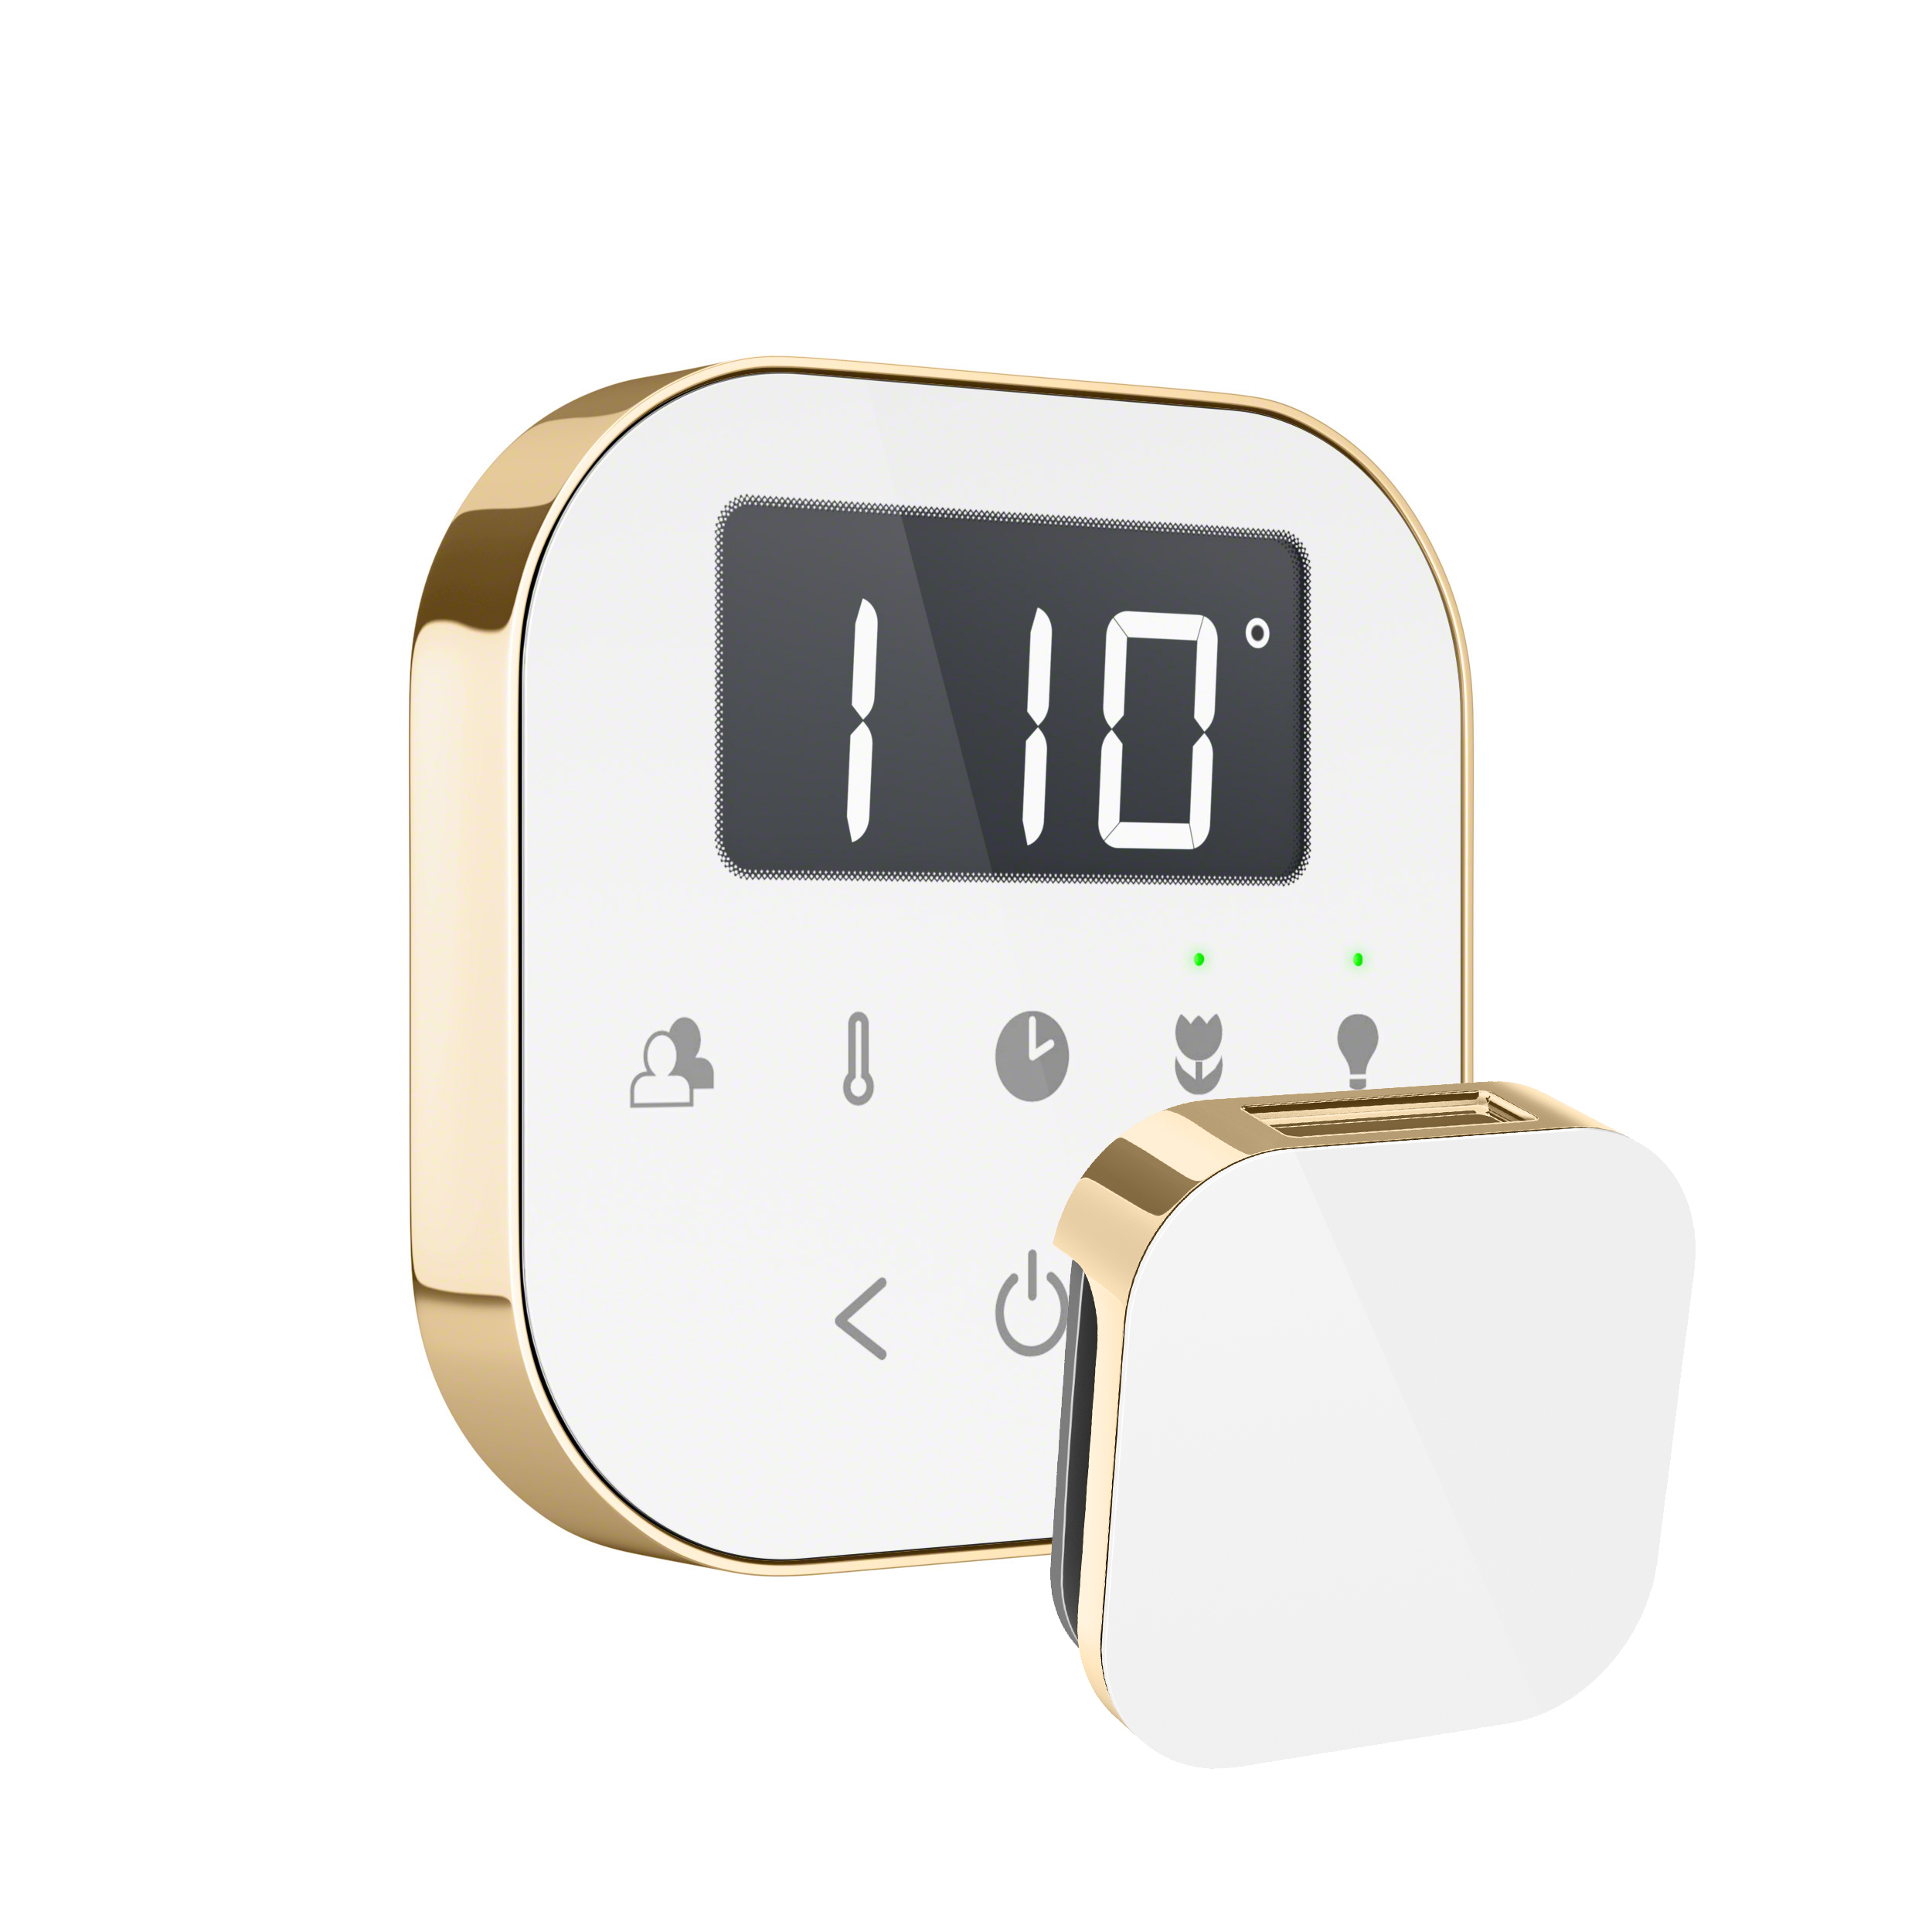 Mr Steam AIRTWH-PB AirTempo Steam Shower Control in White with Polished Brass